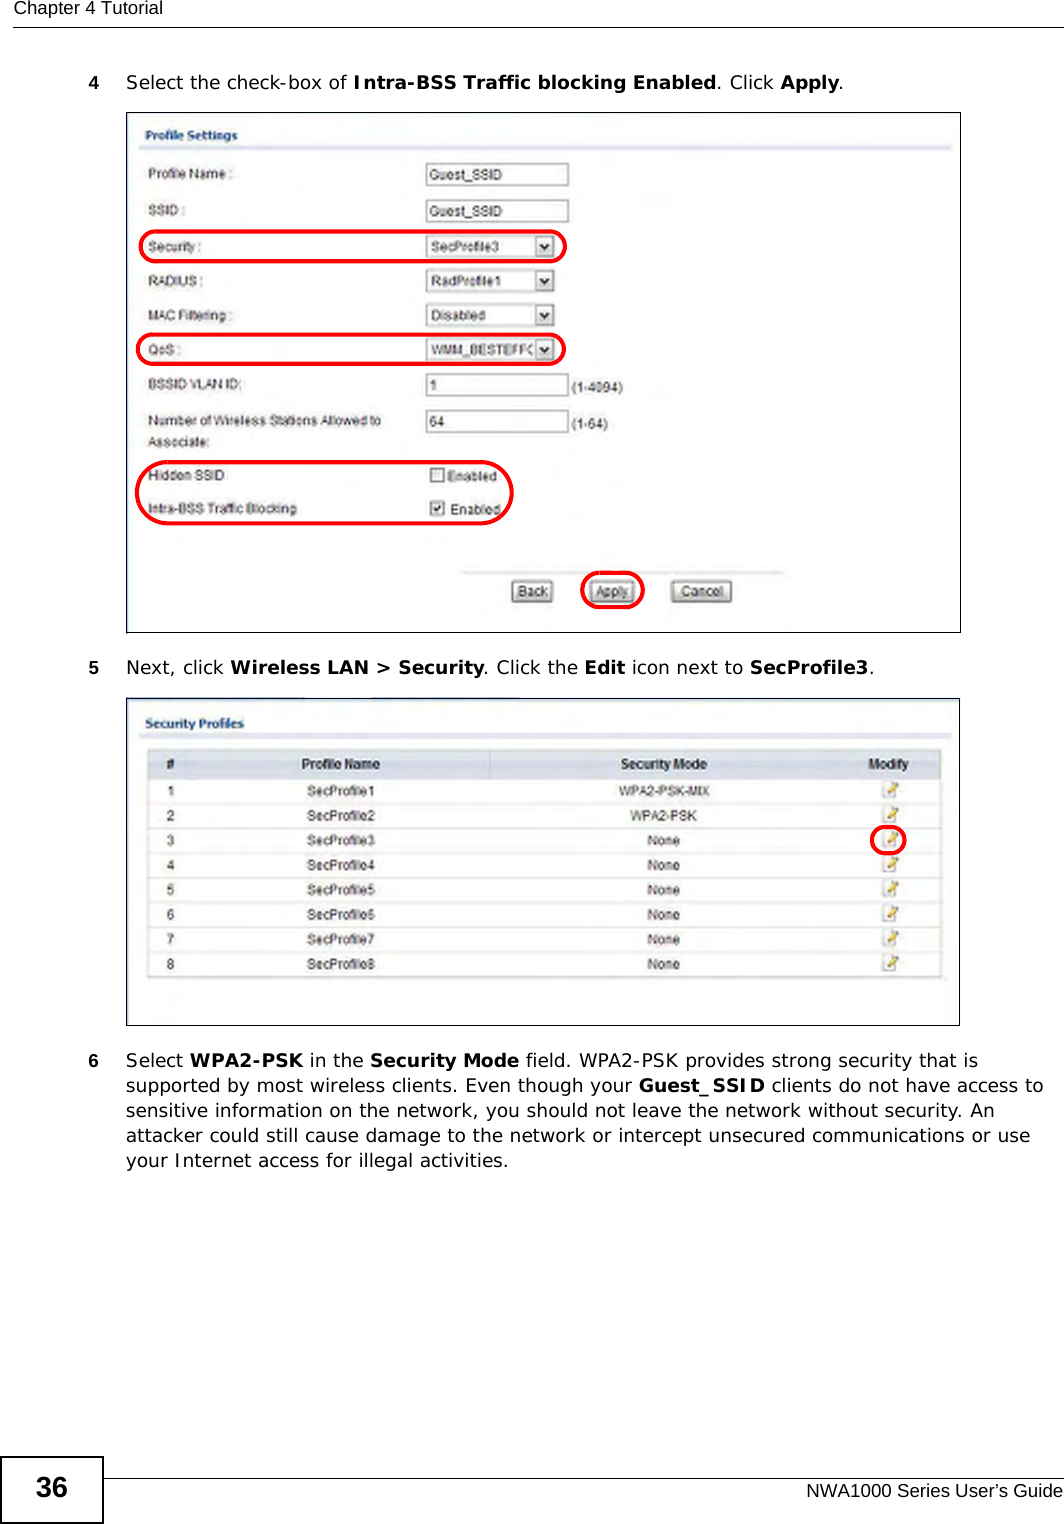 Chapter 4 TutorialNWA1000 Series User’s Guide364Select the check-box of Intra-BSS Traffic blocking Enabled. Click Apply.5Next, click Wireless LAN &gt; Security. Click the Edit icon next to SecProfile3. 6Select WPA2-PSK in the Security Mode field. WPA2-PSK provides strong security that is supported by most wireless clients. Even though your Guest_SSID clients do not have access to sensitive information on the network, you should not leave the network without security. An attacker could still cause damage to the network or intercept unsecured communications or use your Internet access for illegal activities.